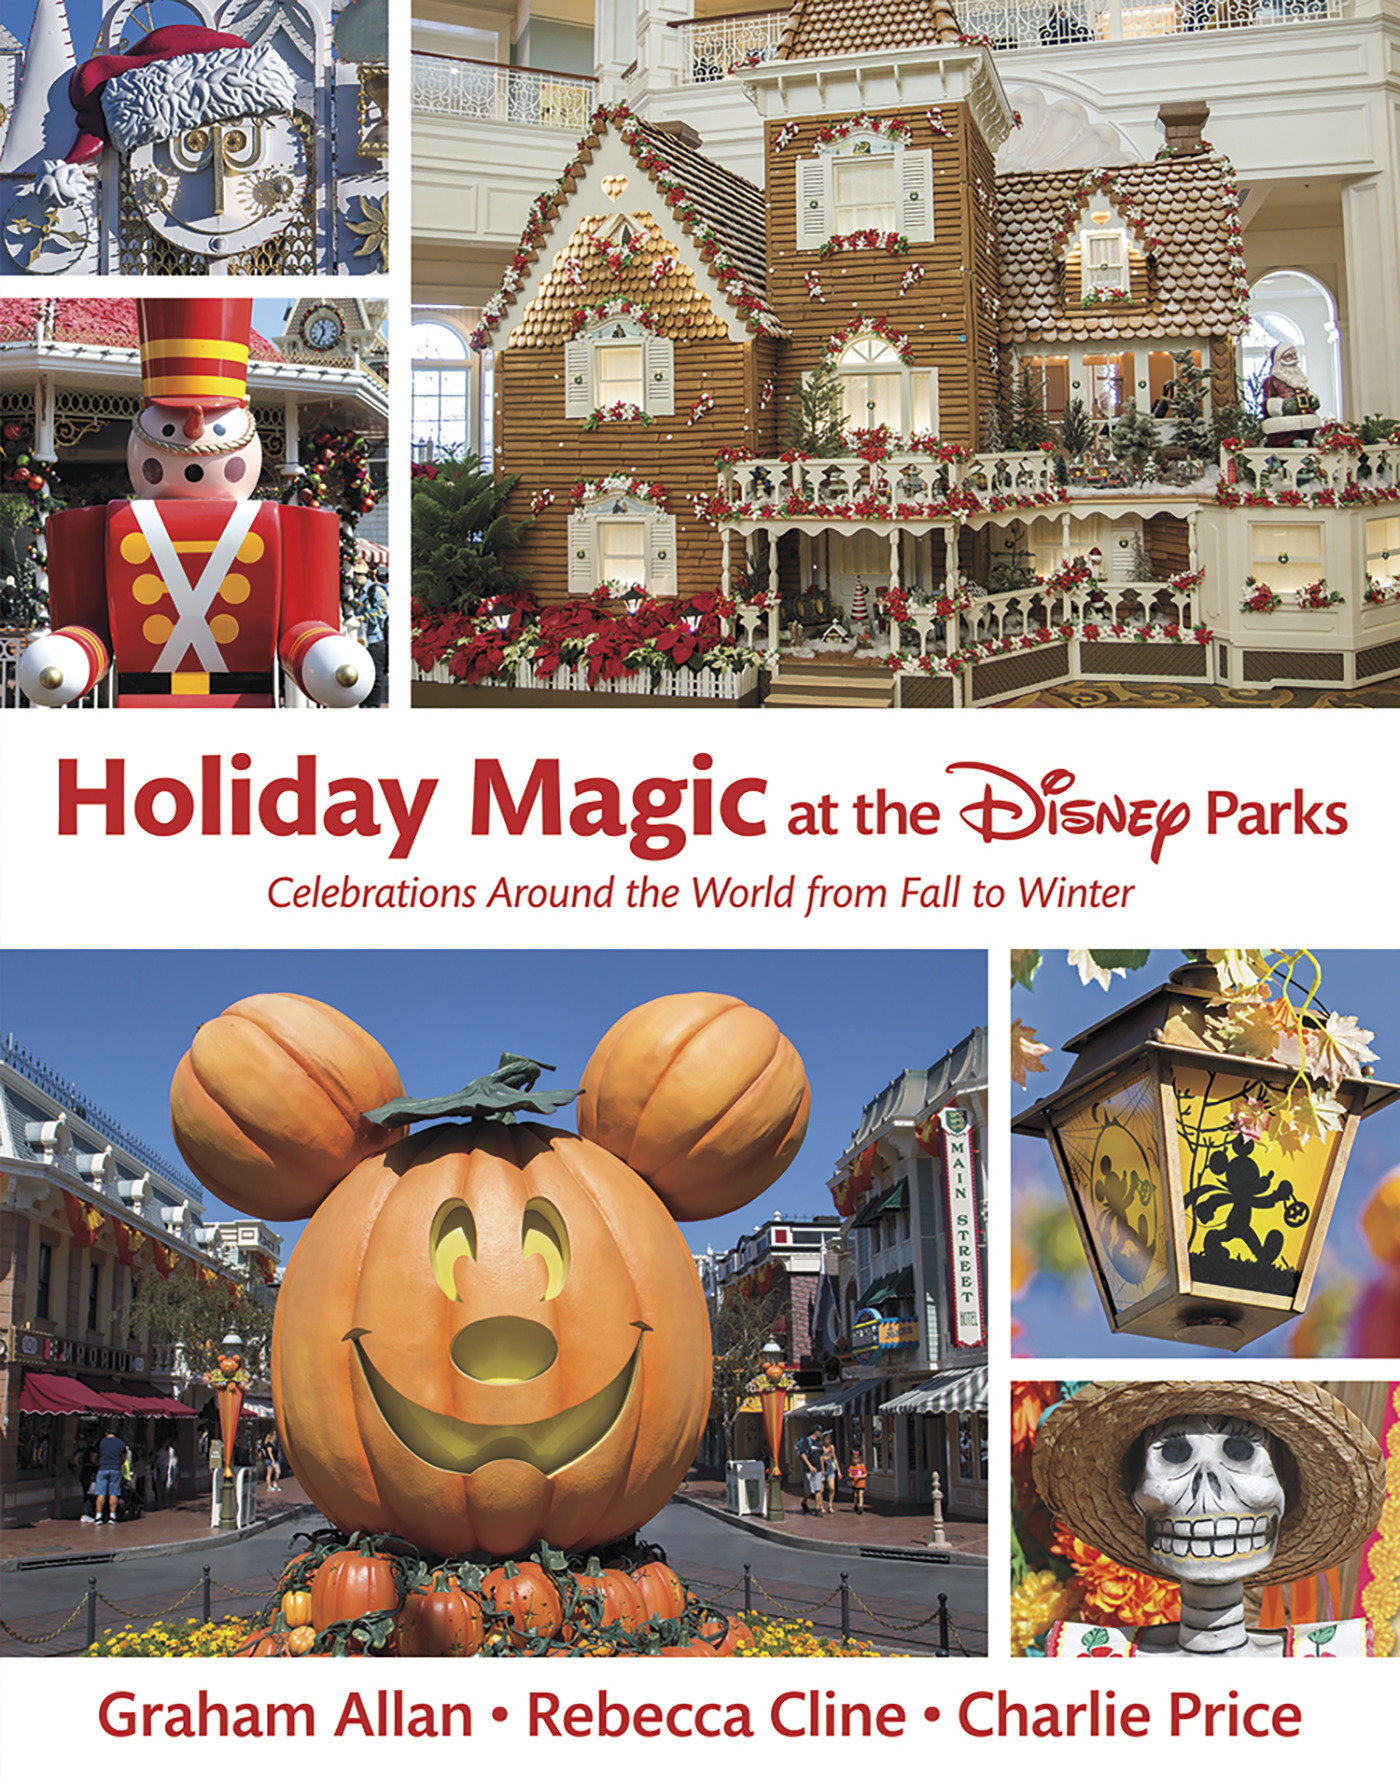 Holiday Magic At The Disney Parks (Hardcover Book)